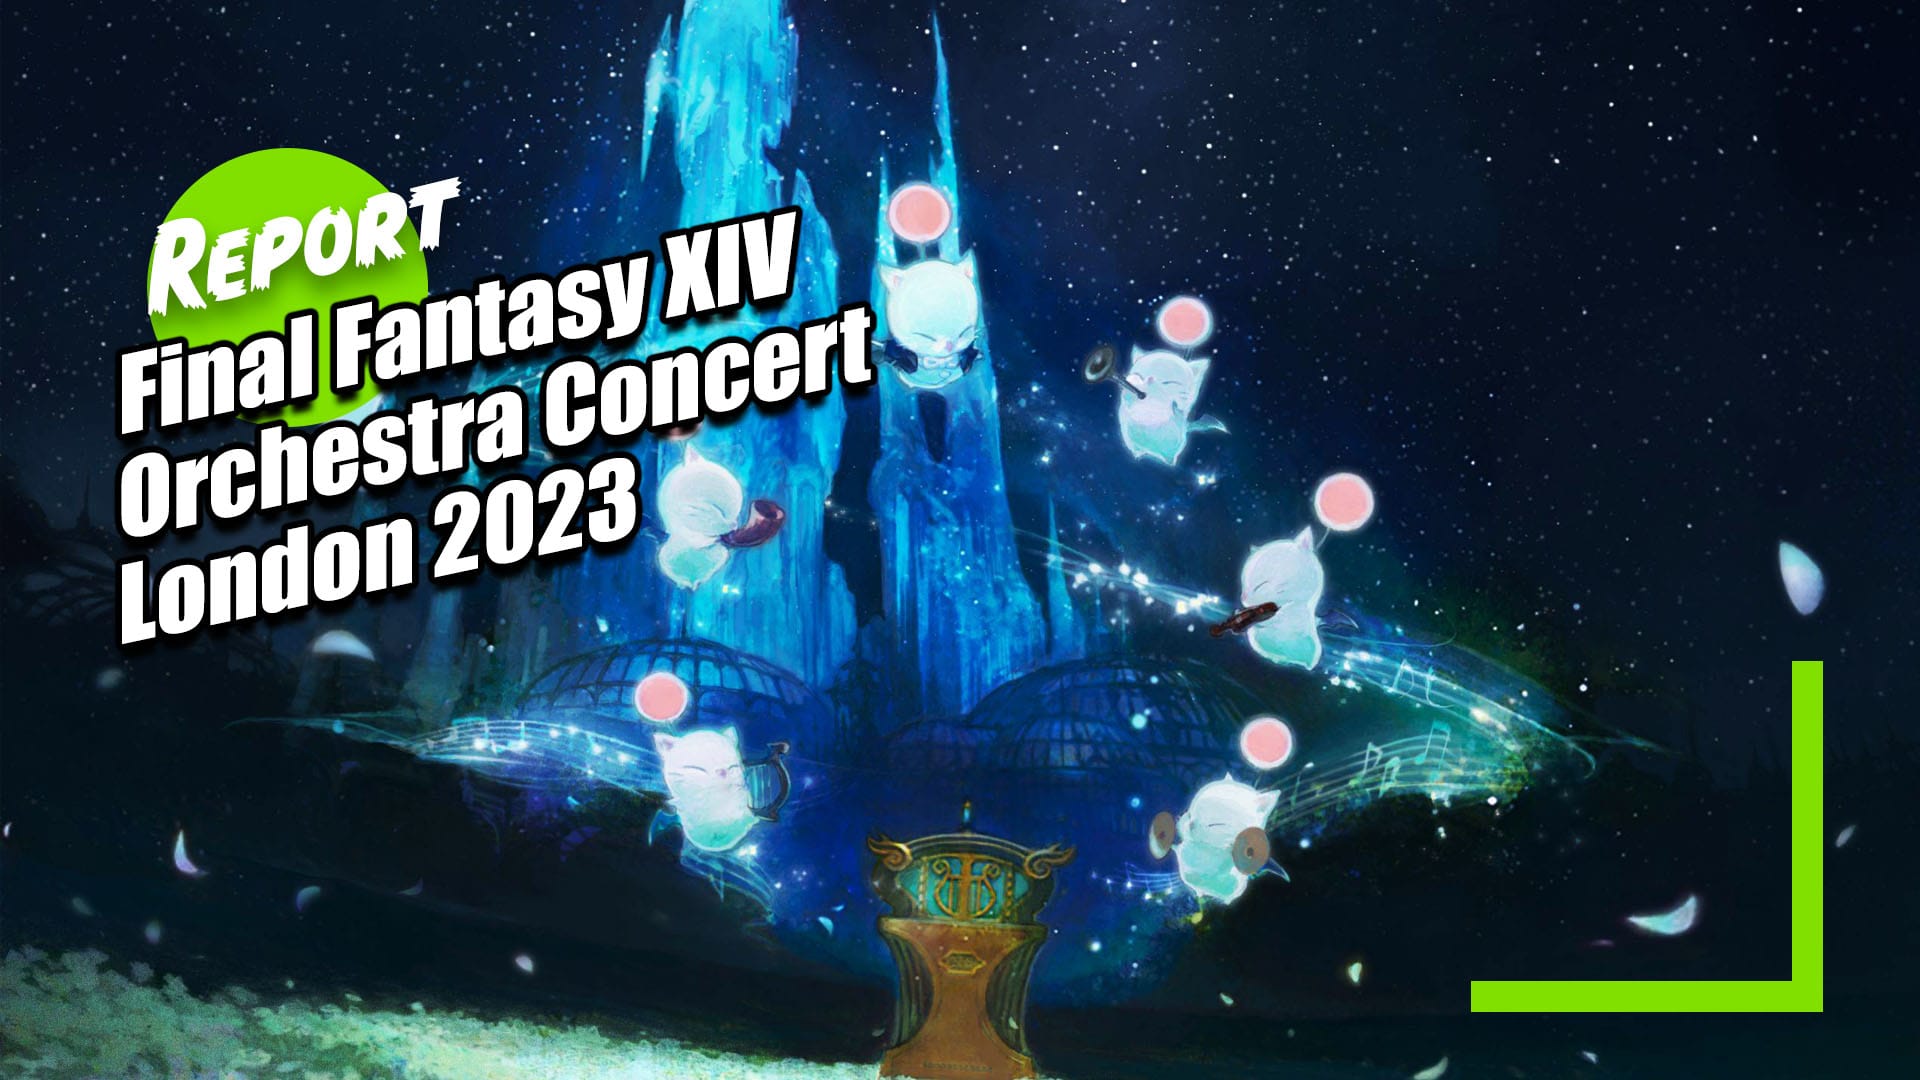 Final Fantasy XIV Orchestra Concert 2023 in London Was a Majestic, Emotional Celebration